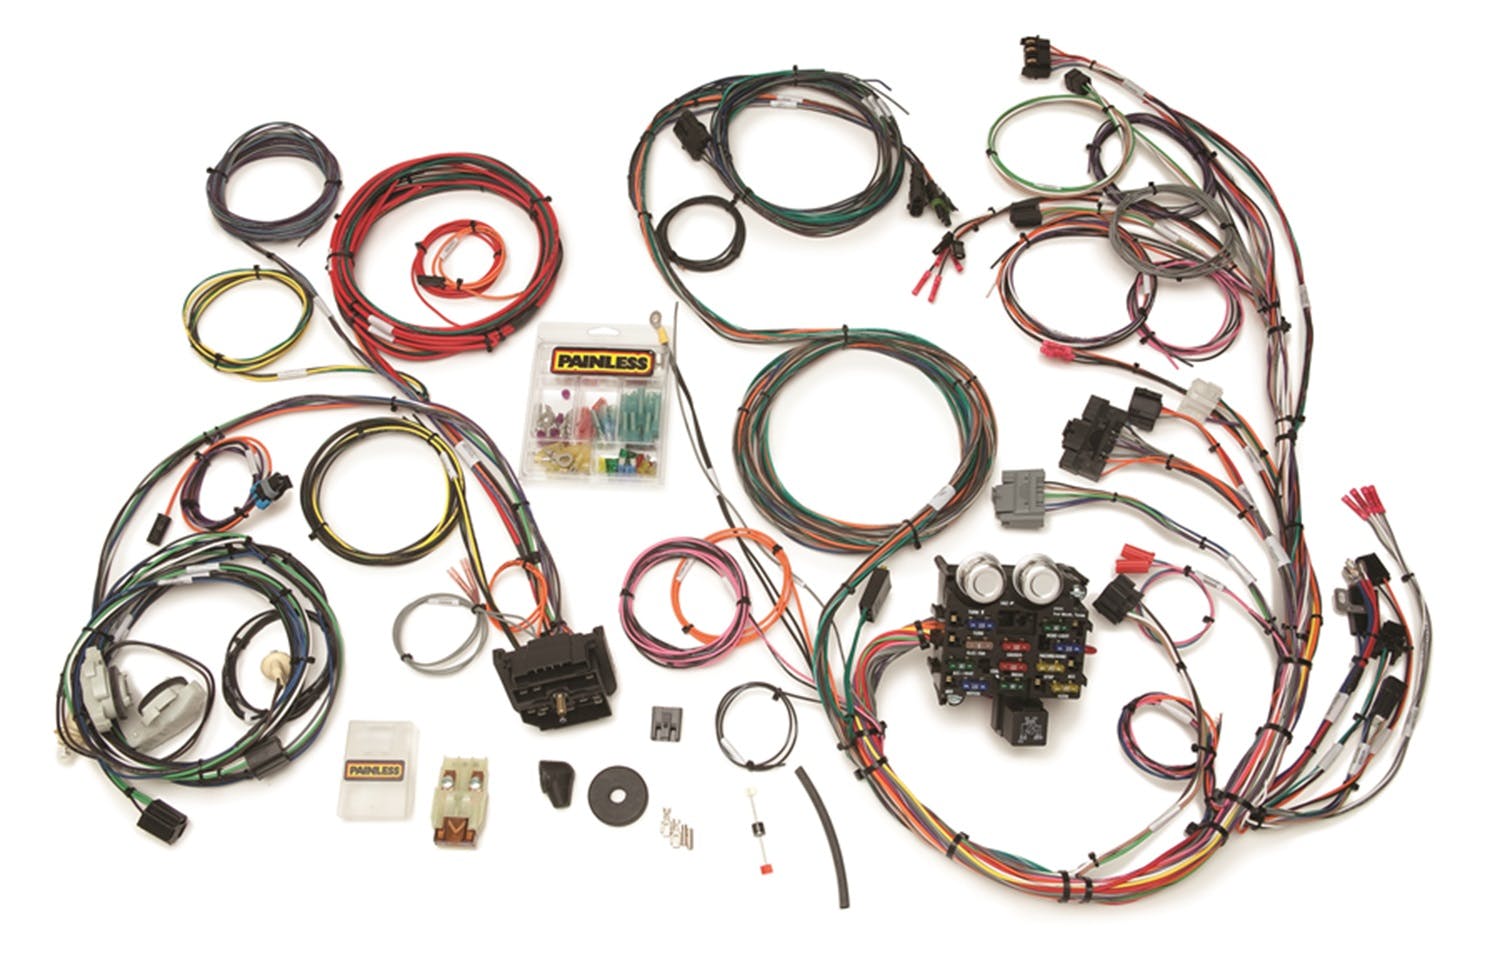 Painless 10111 23 Circuit Wiring Harness